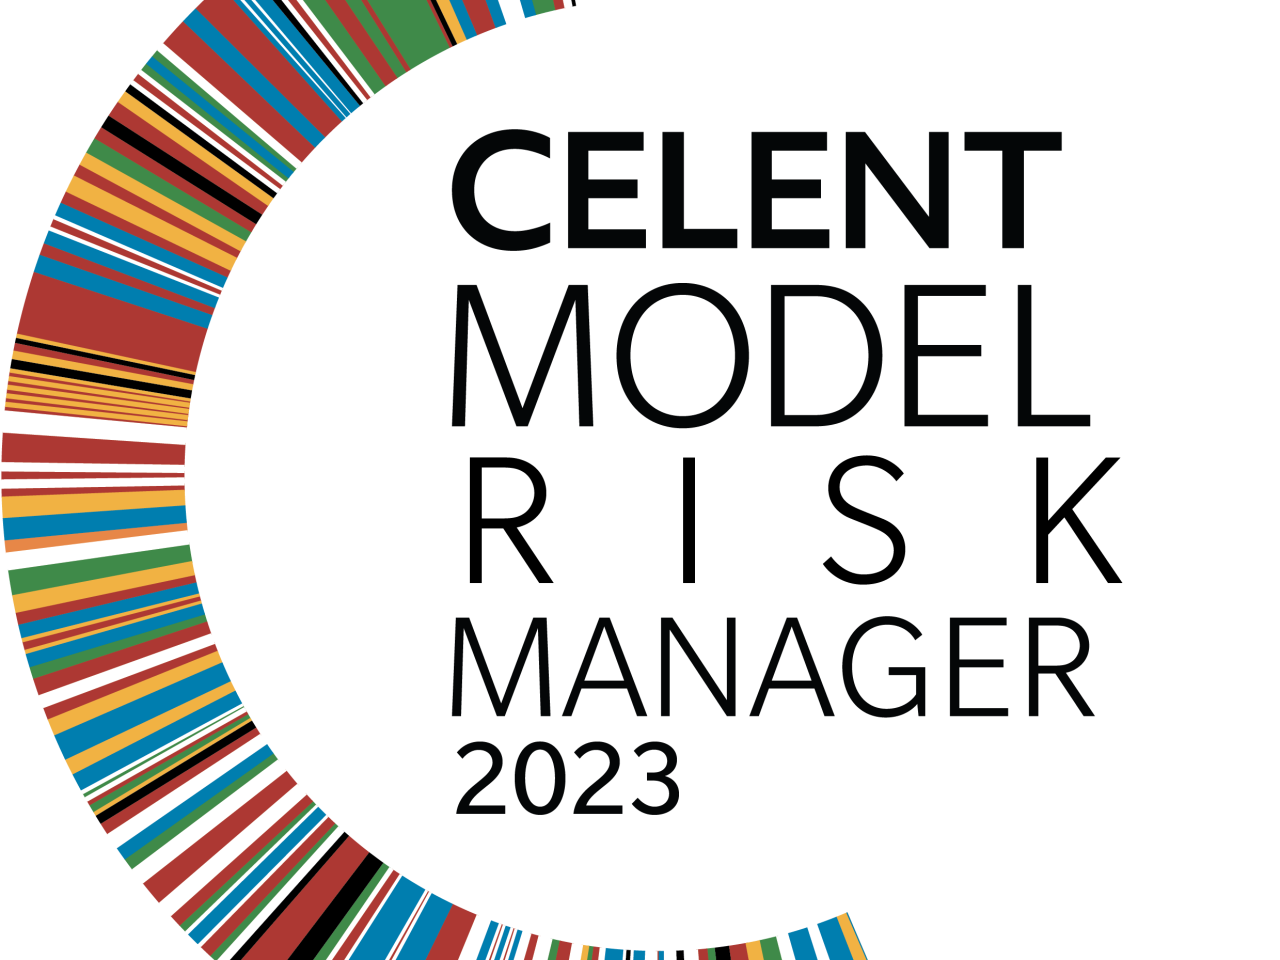 "Celent model risk manager 2023" and logo of many colored stripes in a C formation.